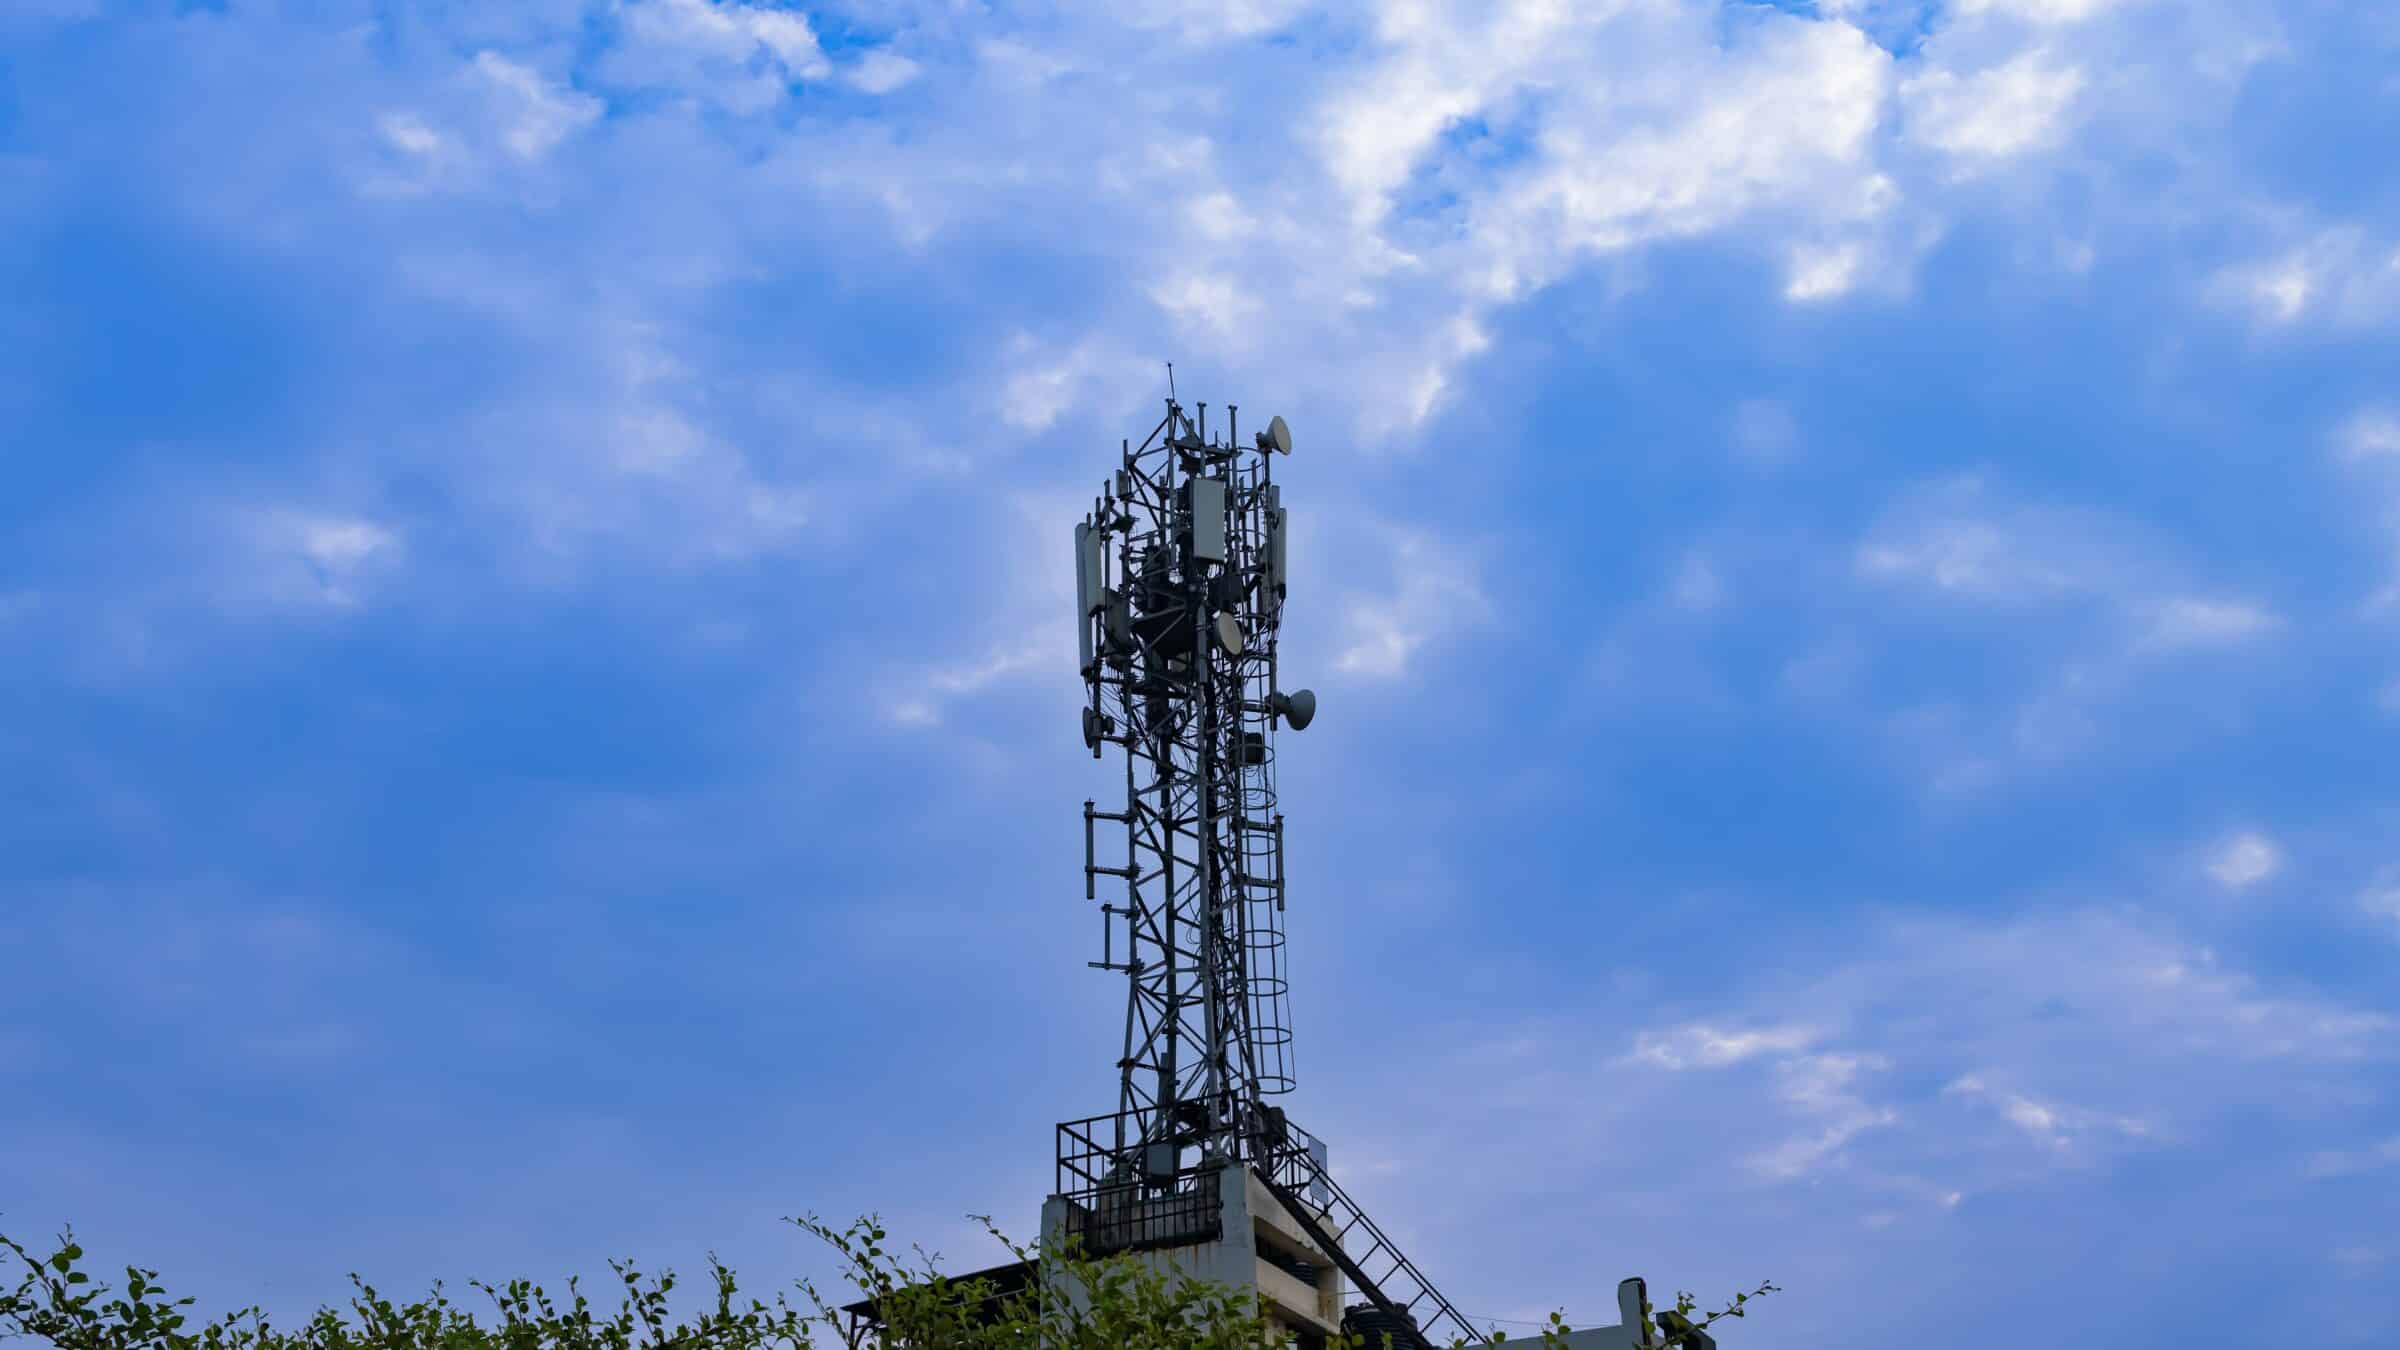 A cellular tower in the day time